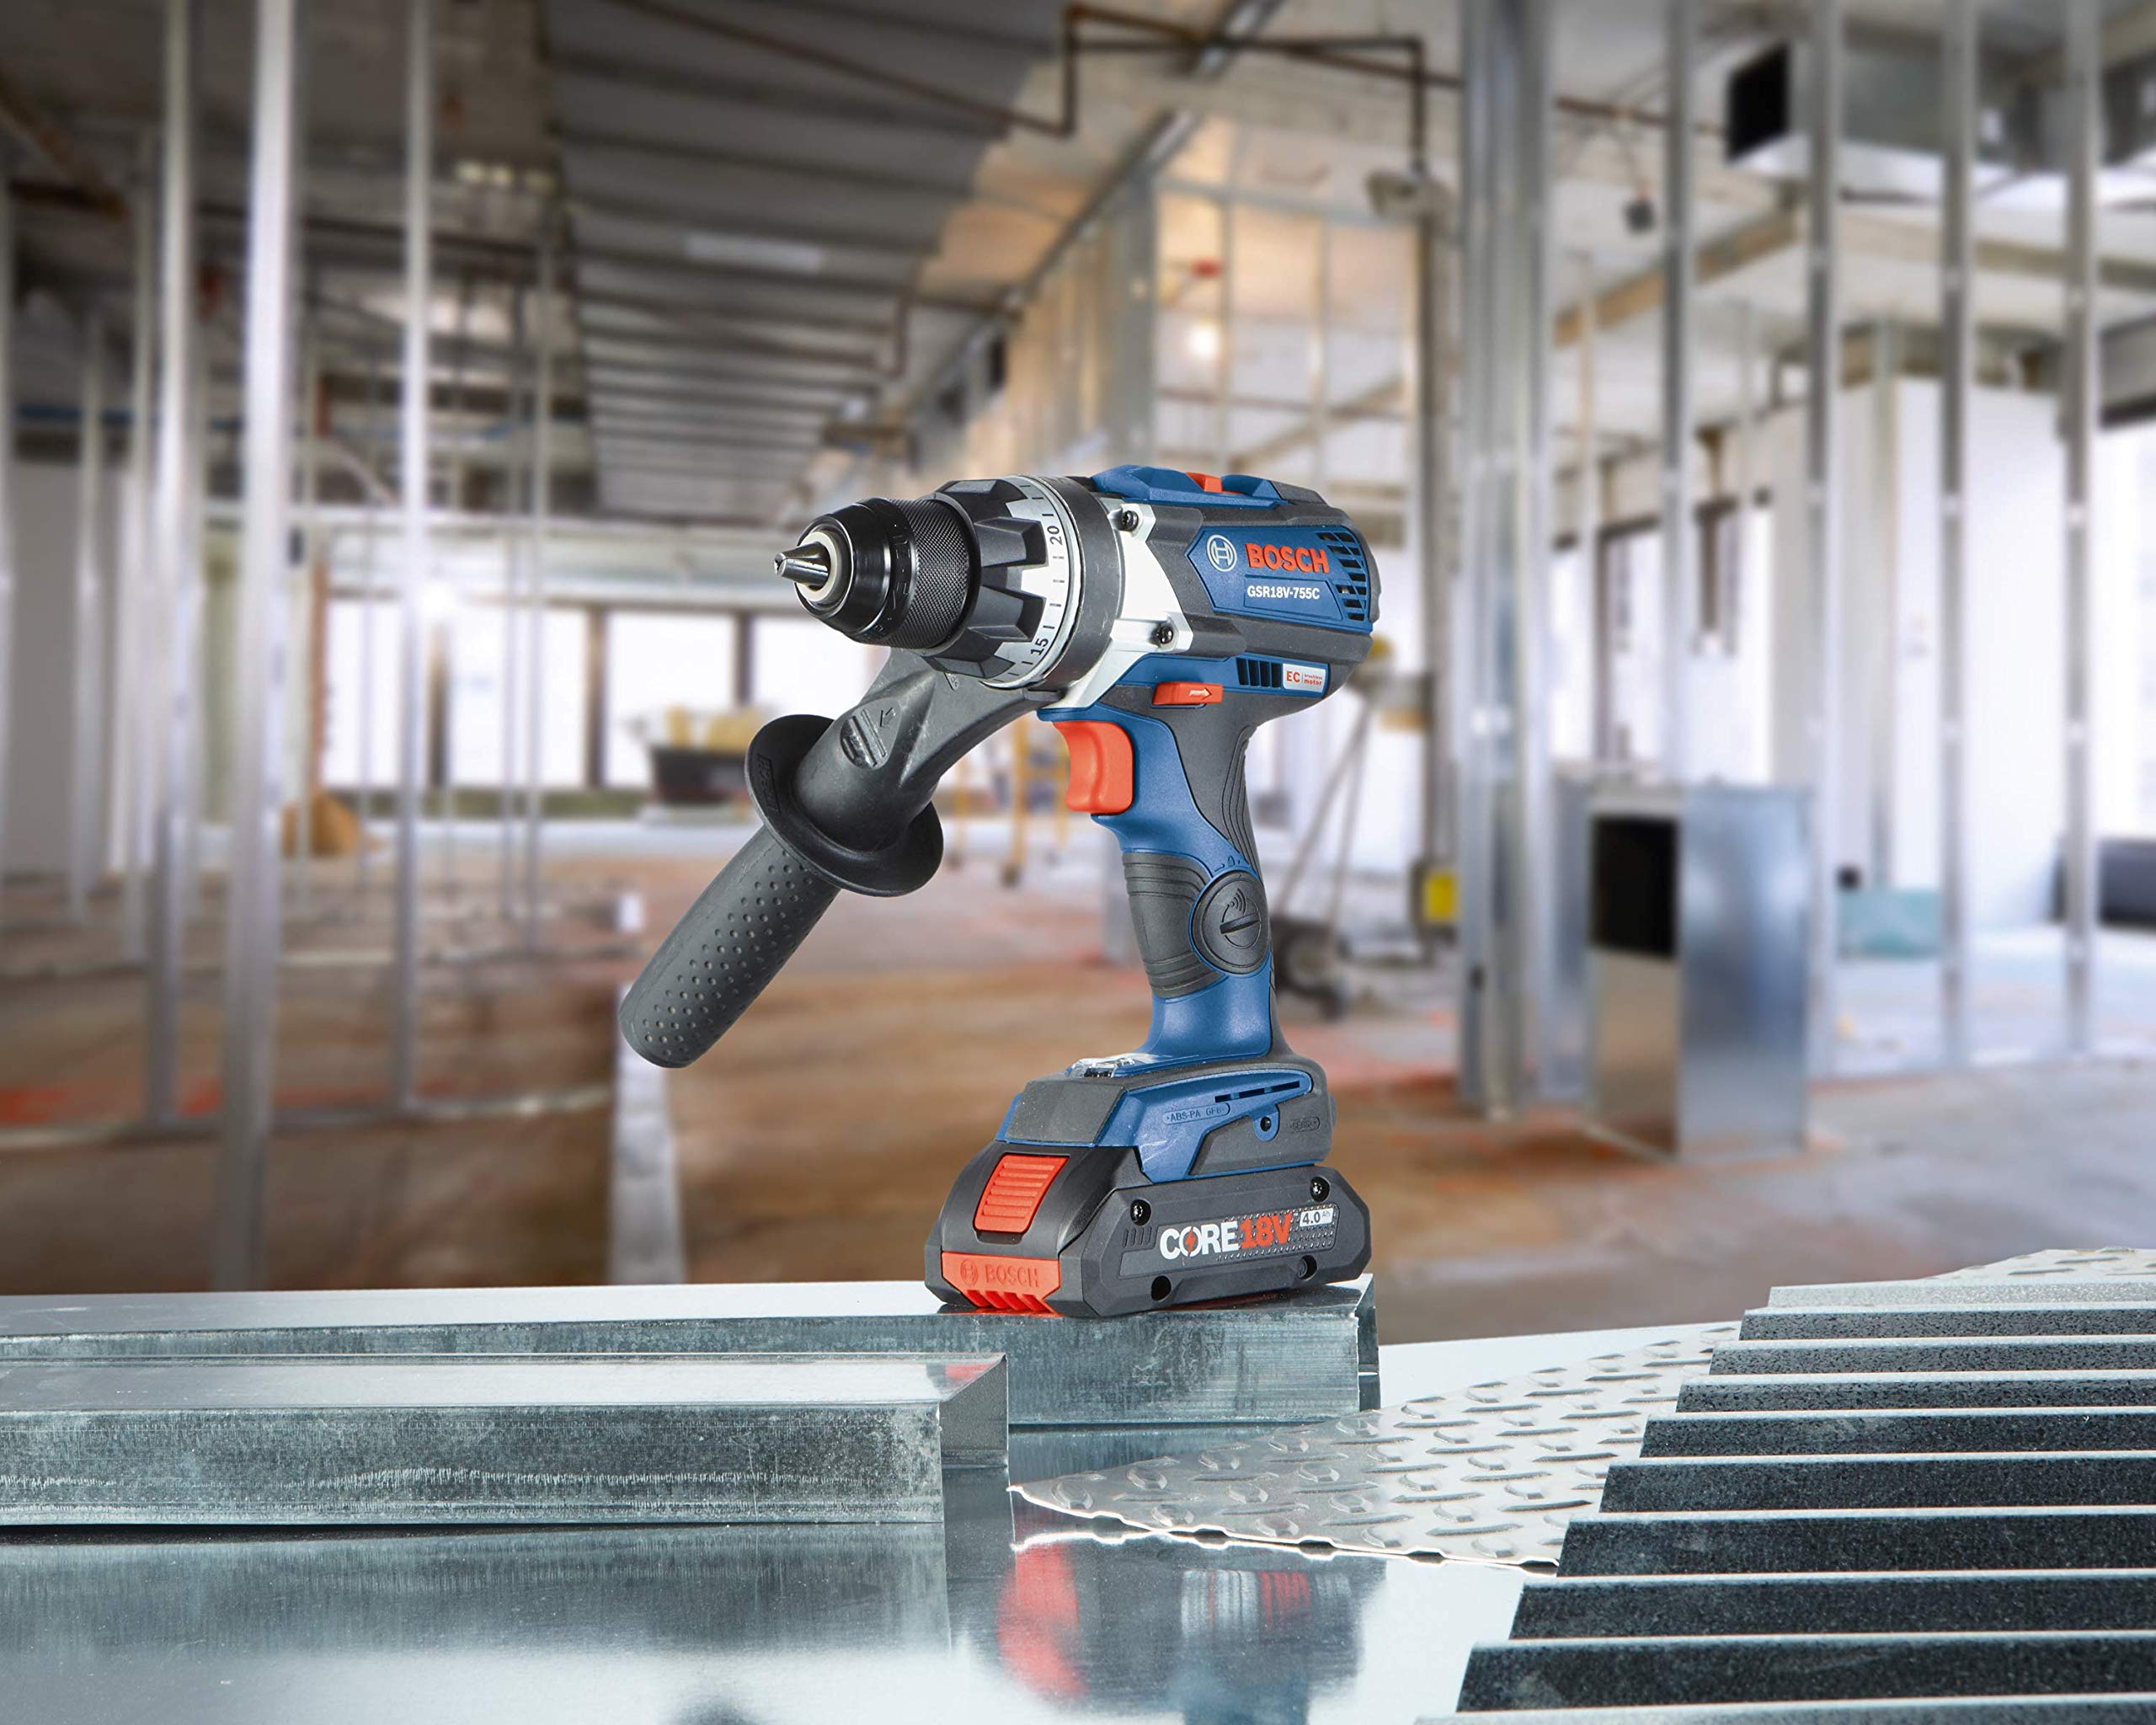 BOSCH GSR18V-755CB25 18V EC Brushless Connected-Ready Brute Tough 1/2 In. Drill/Driver Kit with (2) CORE18V 4.0 Ah Compact Batteries